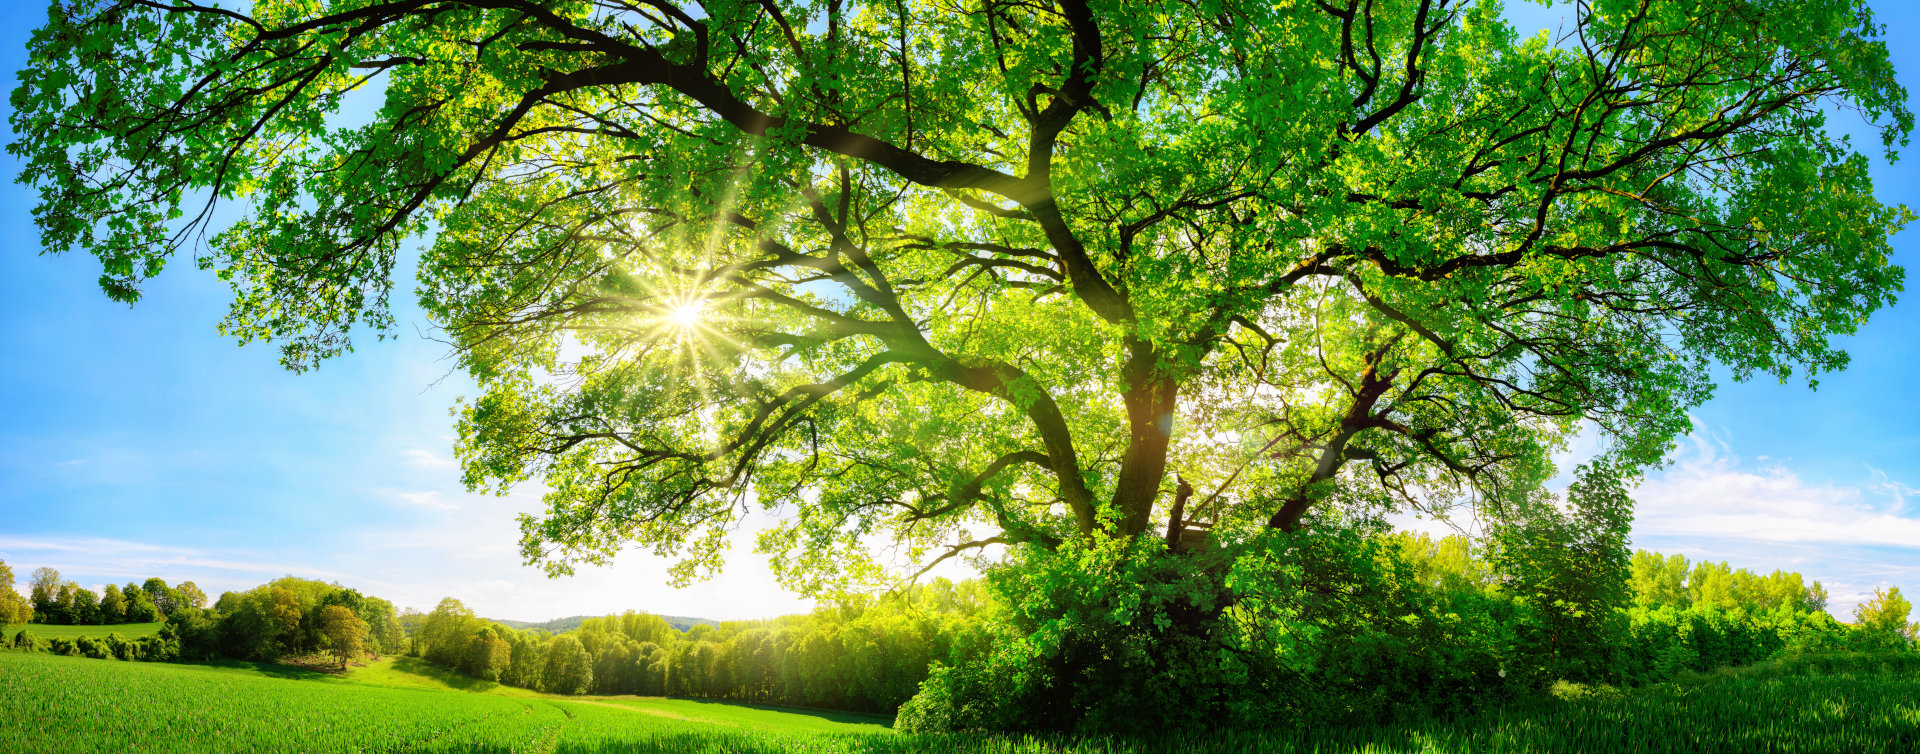 Going the extra (leafy) mile: We’re planting 2 trees for every new virtual server